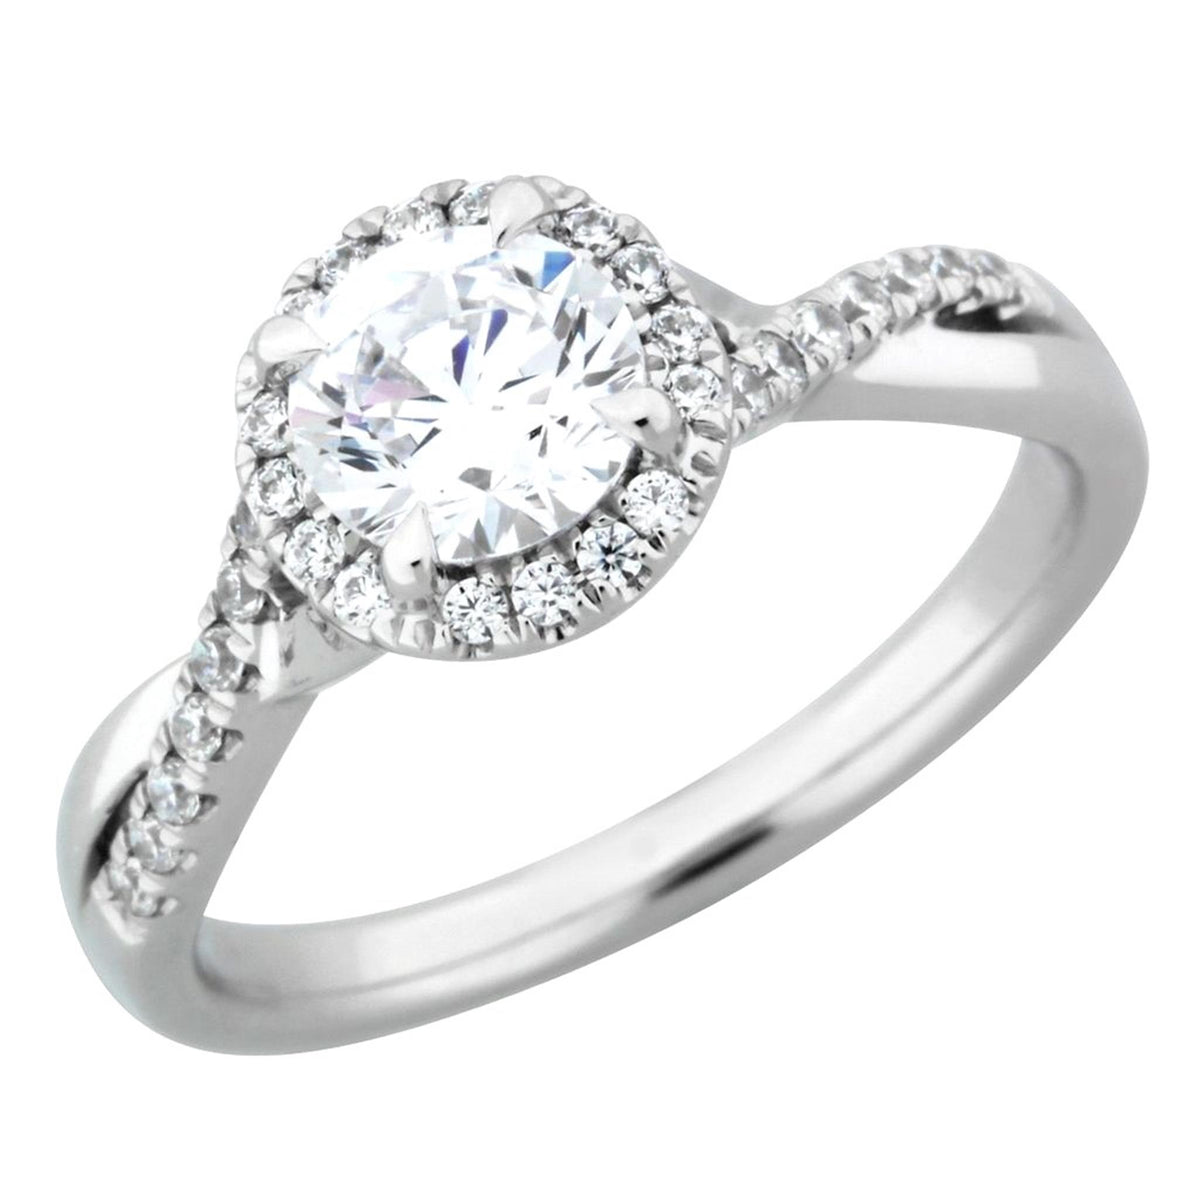 14Kt White Gold Royal Halo Engagement Ring With 0.70ct Natural Center Diamond